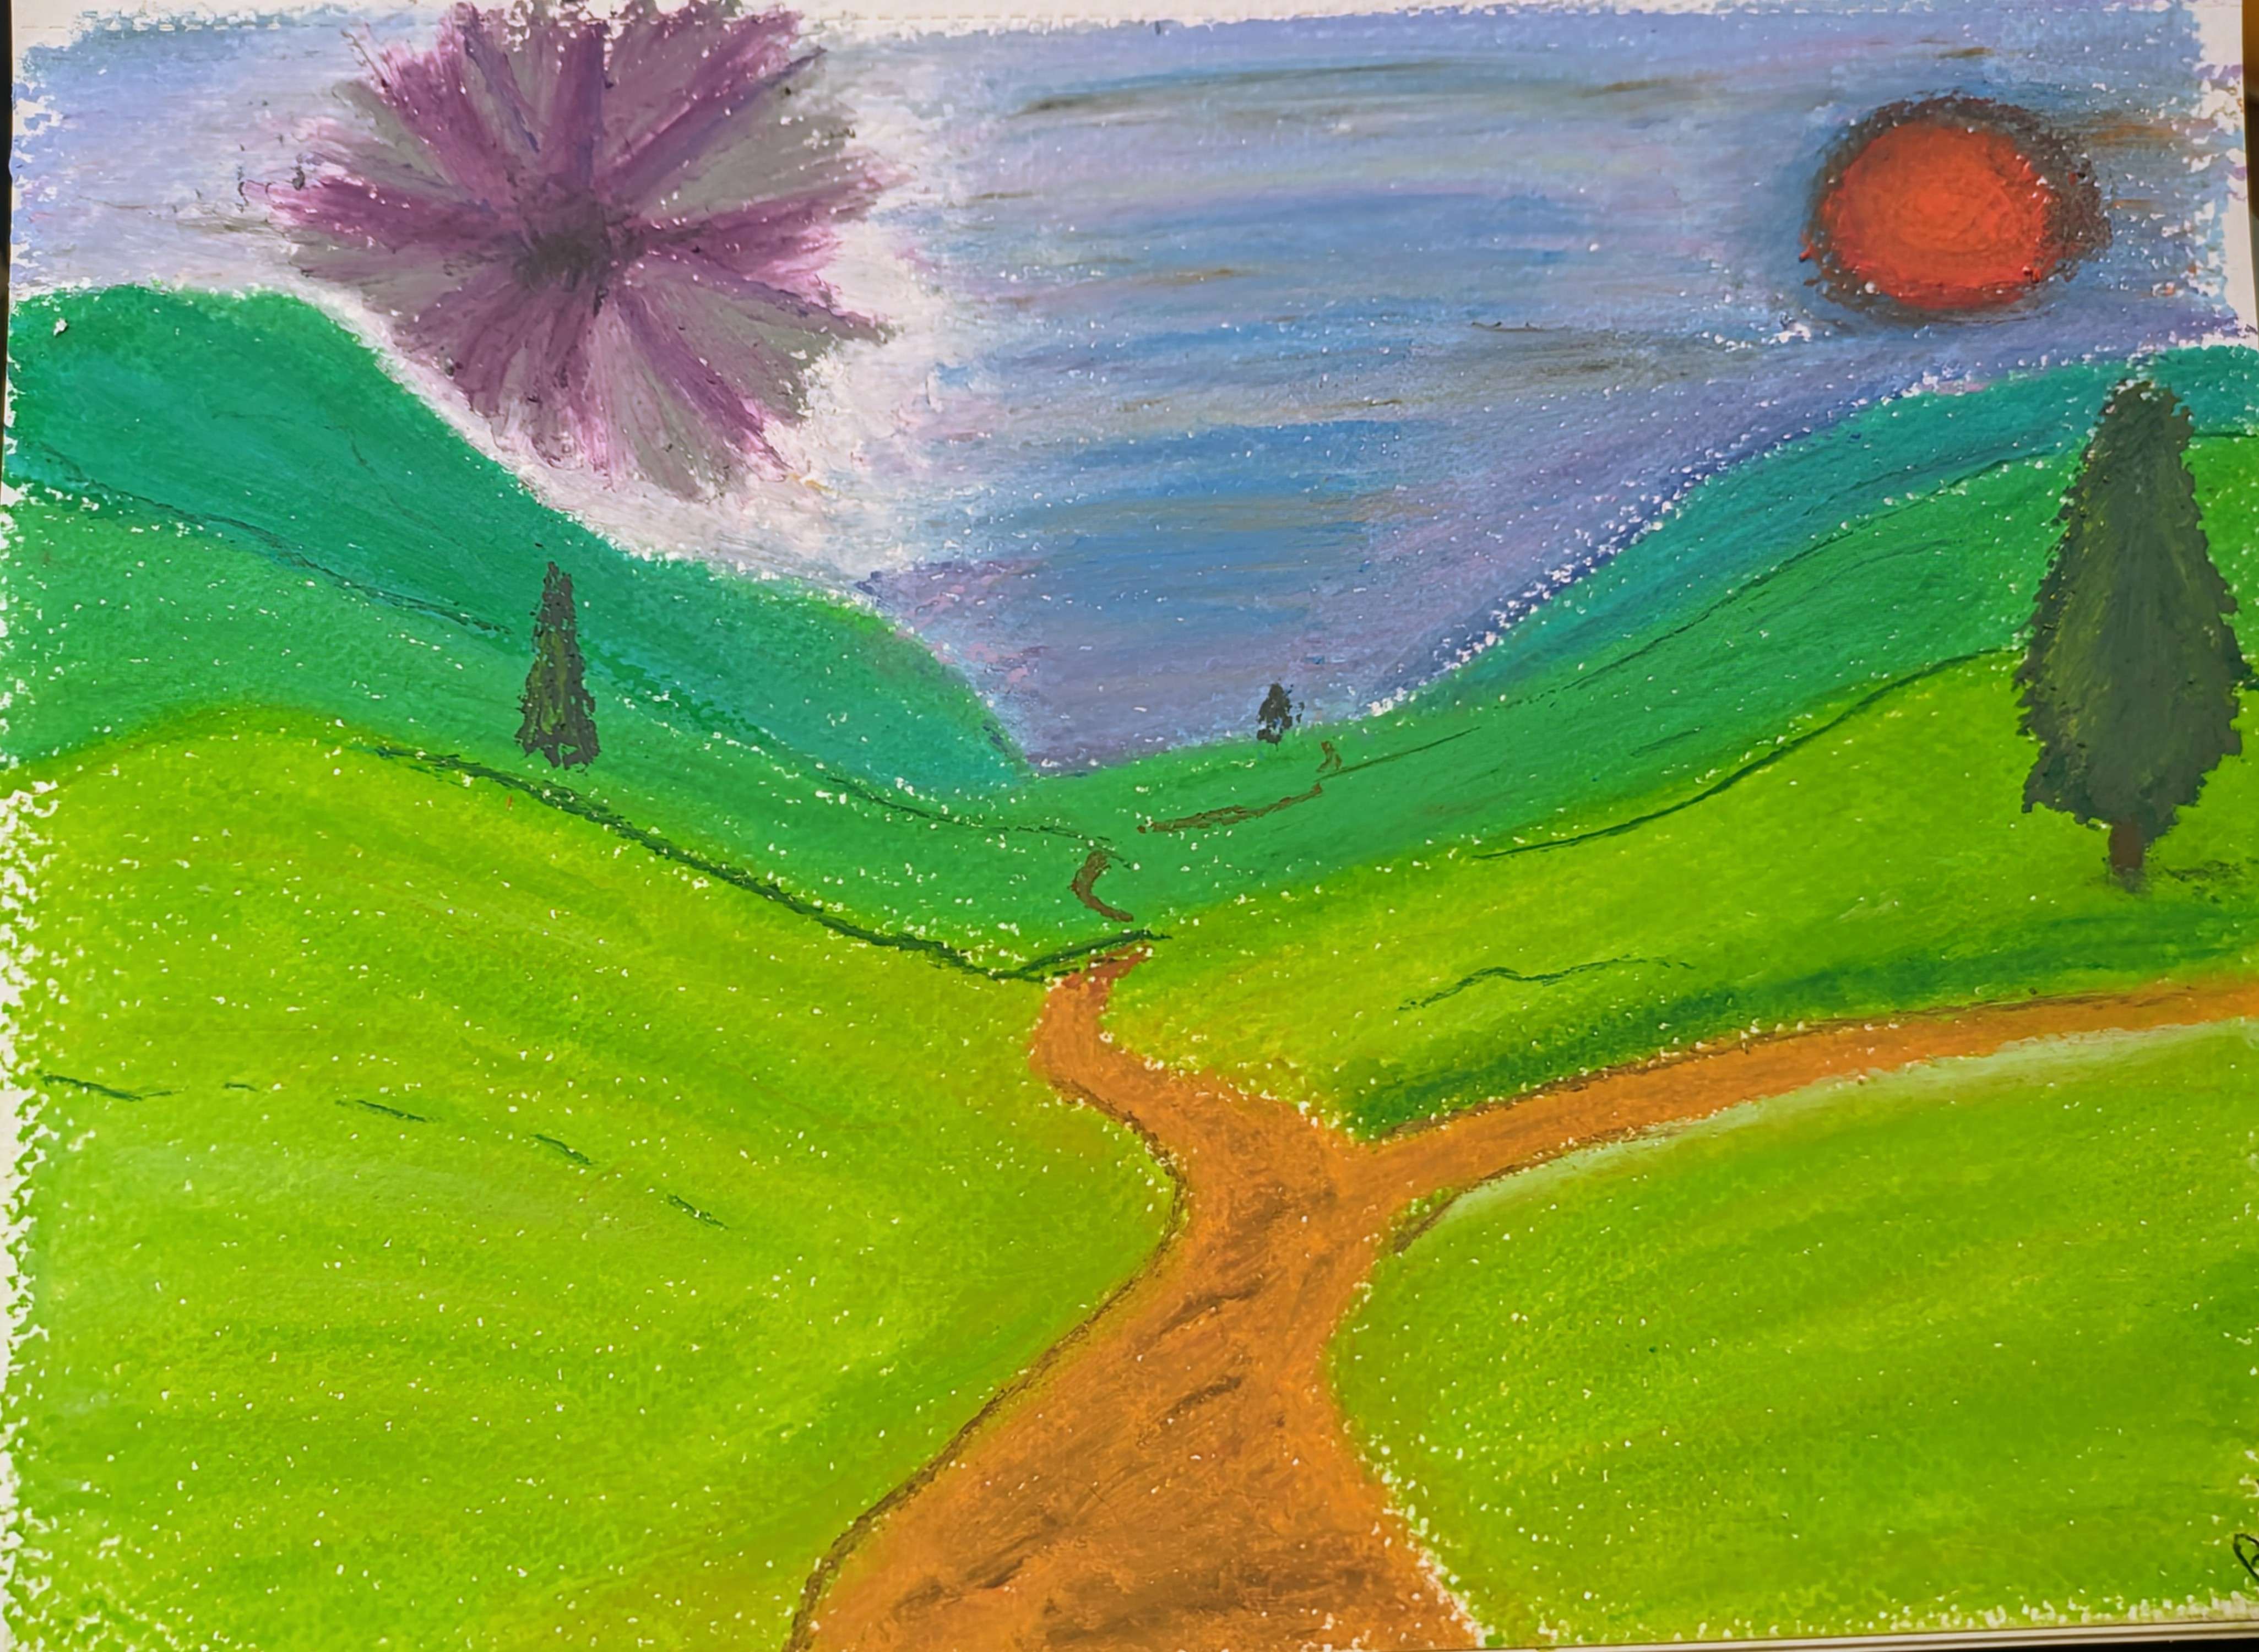 An oil pastel drawing of a road cutting through rolling hills. Several trees can be seen. The sky is colored in purples and blues, and features a blood red sun and a strange, purple vortex.